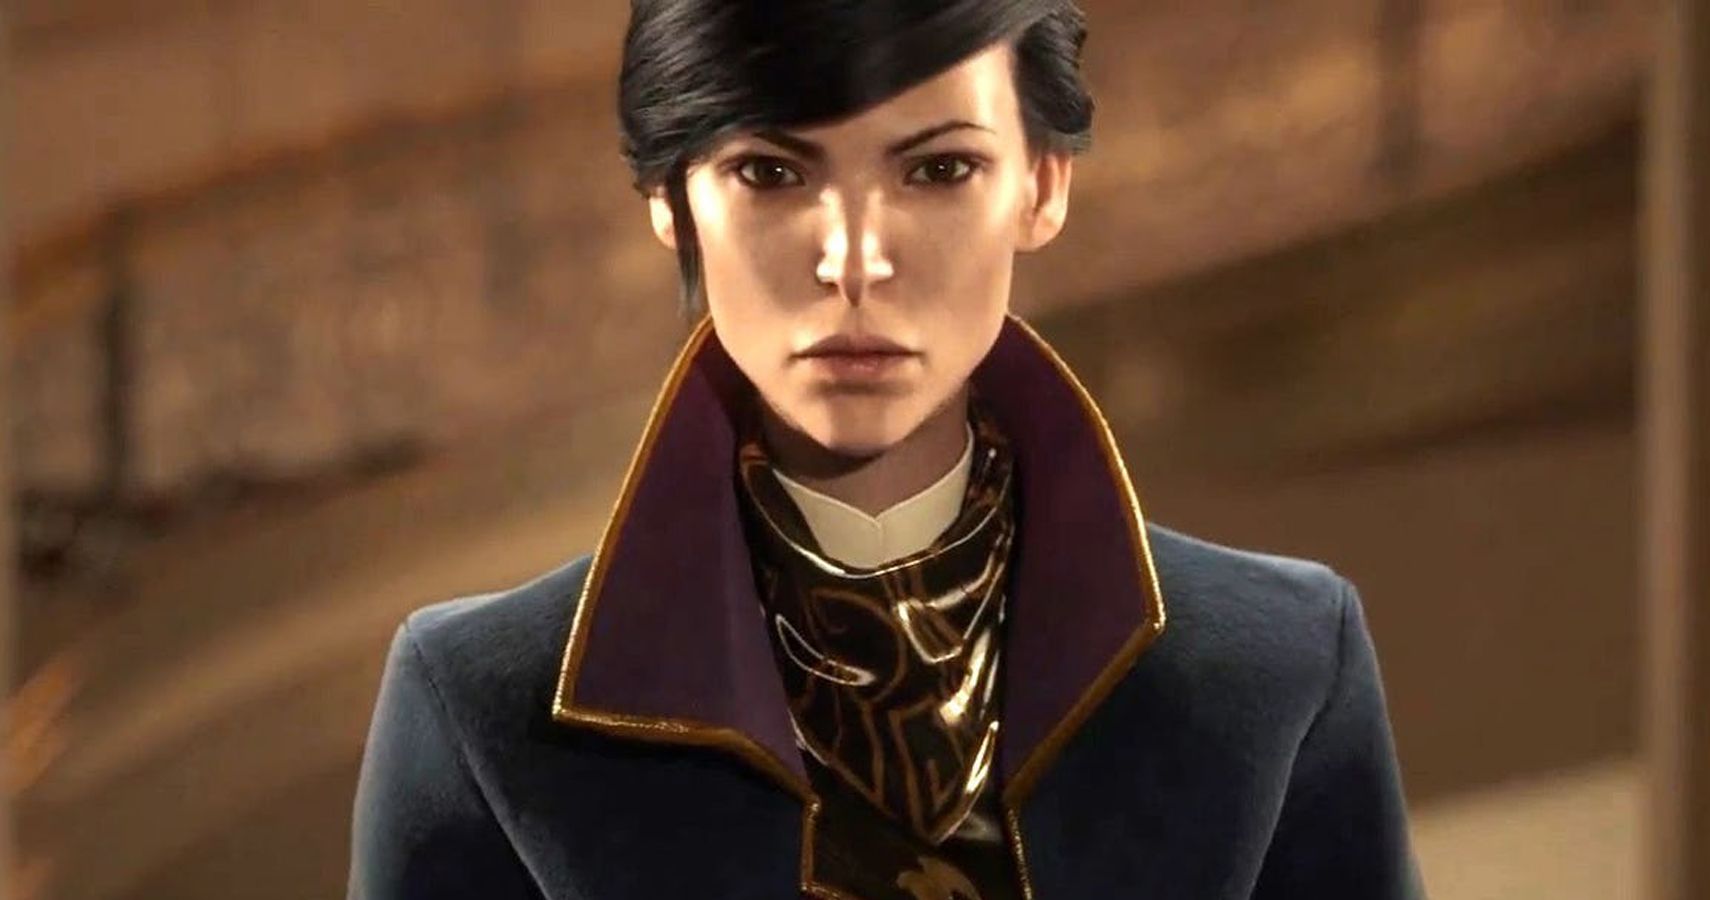 dishonored-2-10-things-you-didn-t-know-about-emily